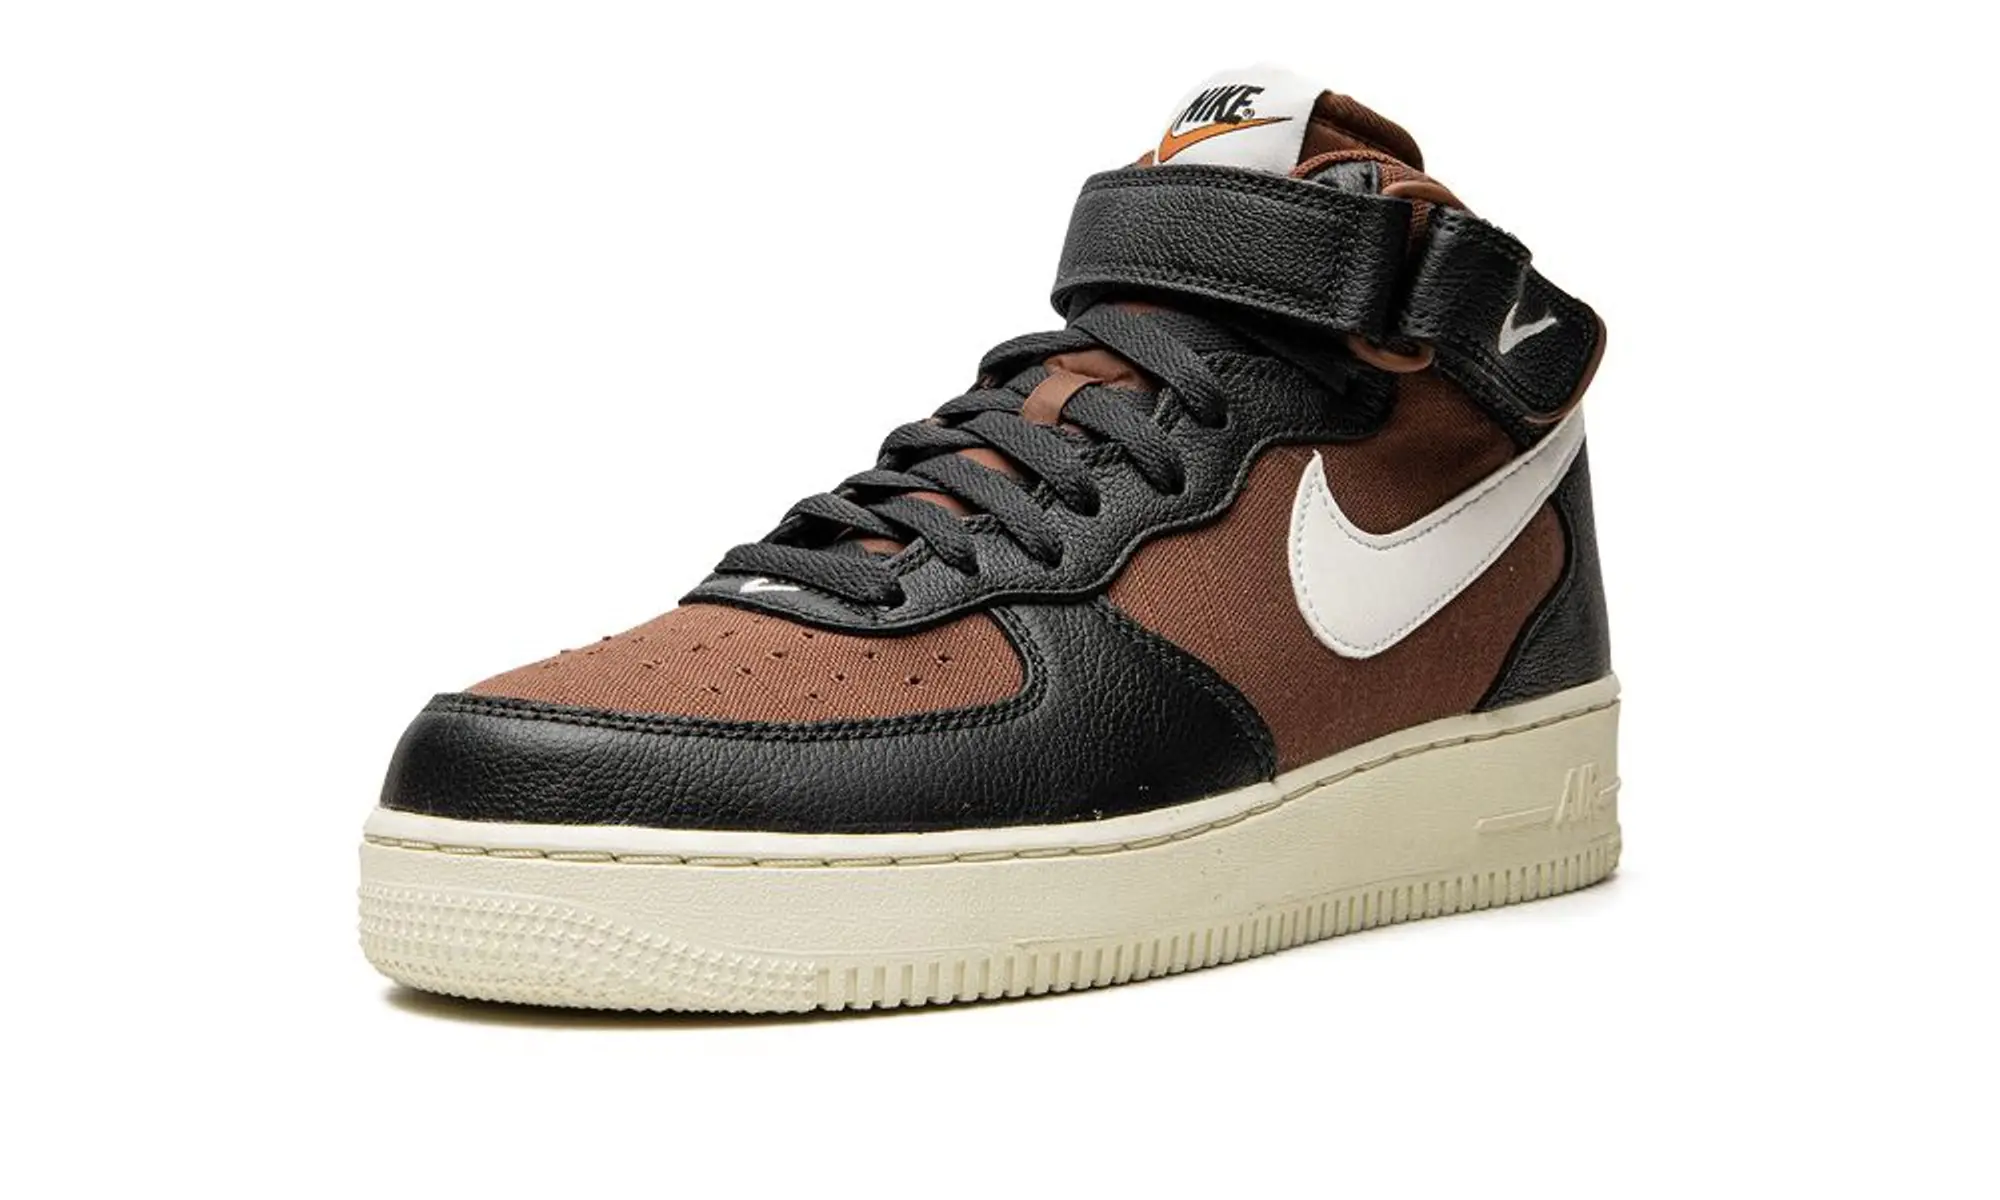 Nike Air Force 1 Mid ' 07 LUX Certified Fresh Shoes